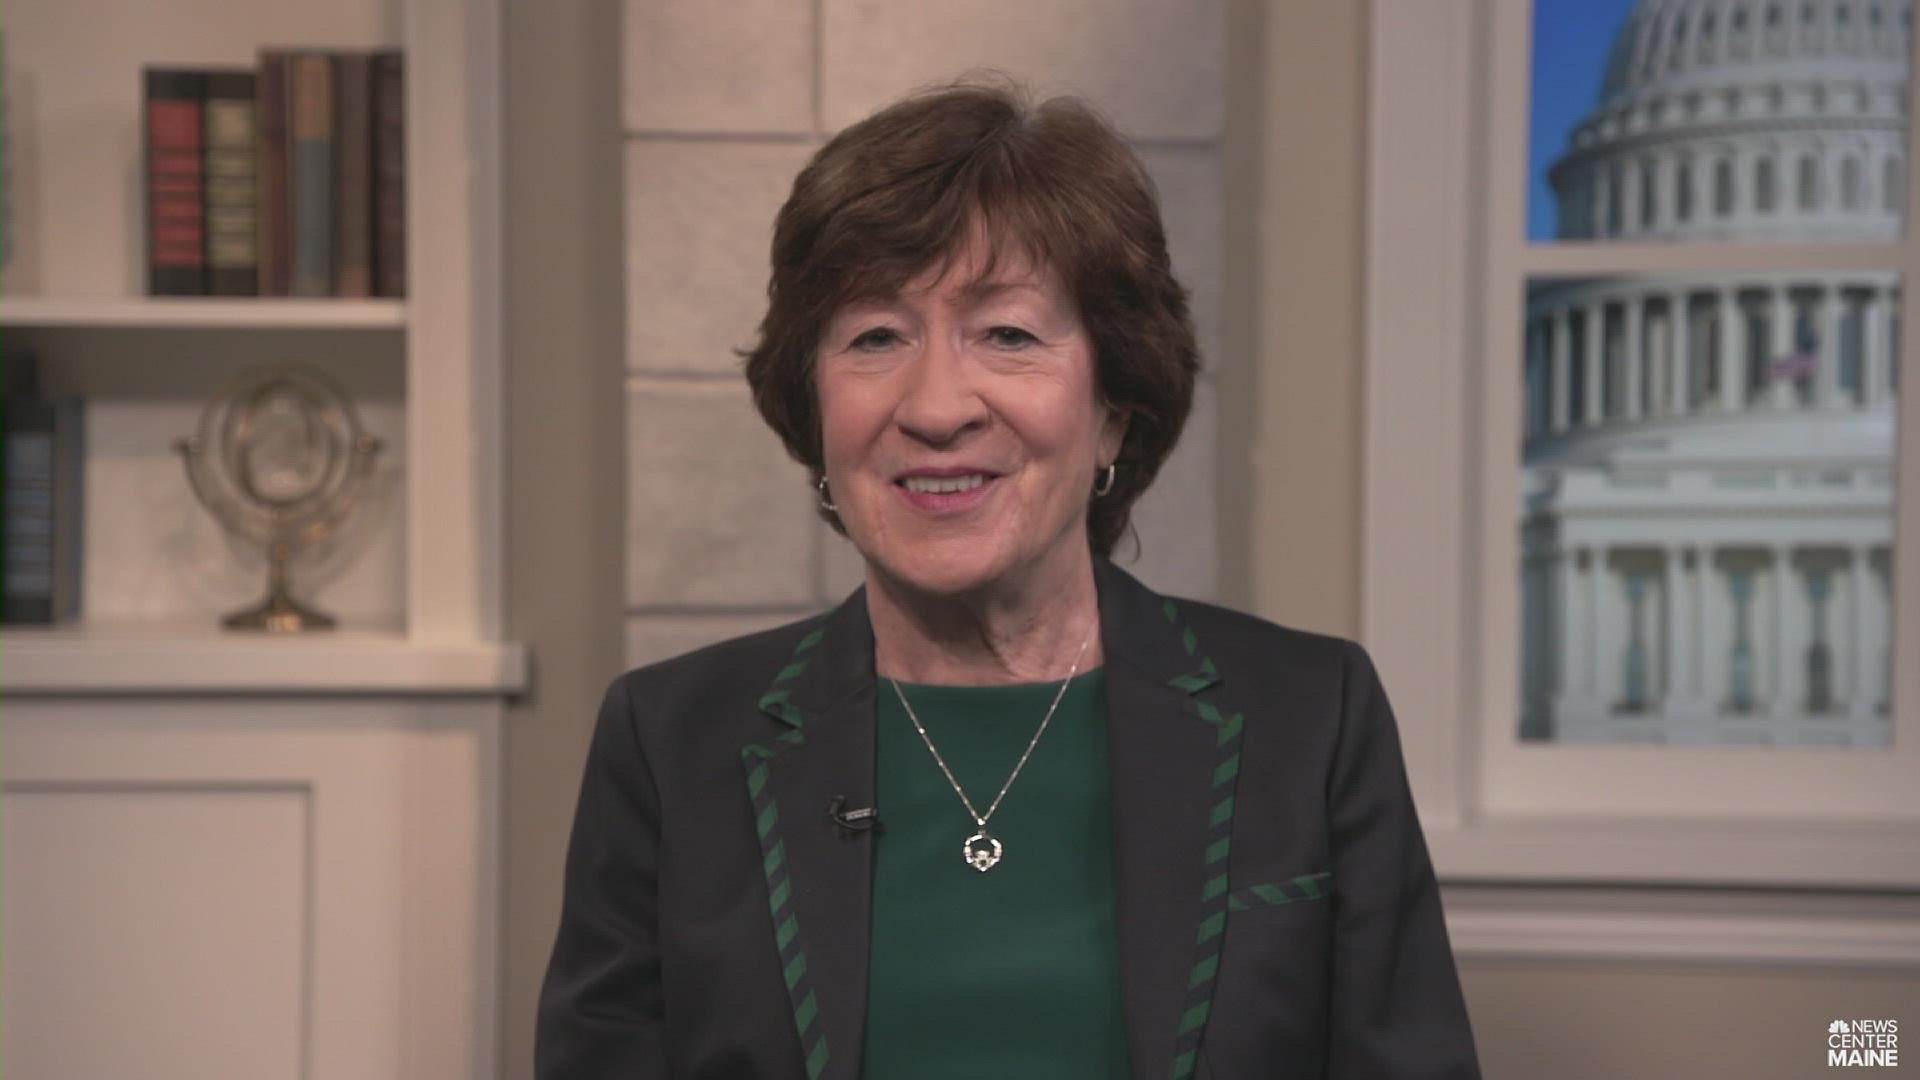 Sen. Susan Collins said Congress can, and should ask for the Jan. 6 resurrection subpoenas to be enforced.